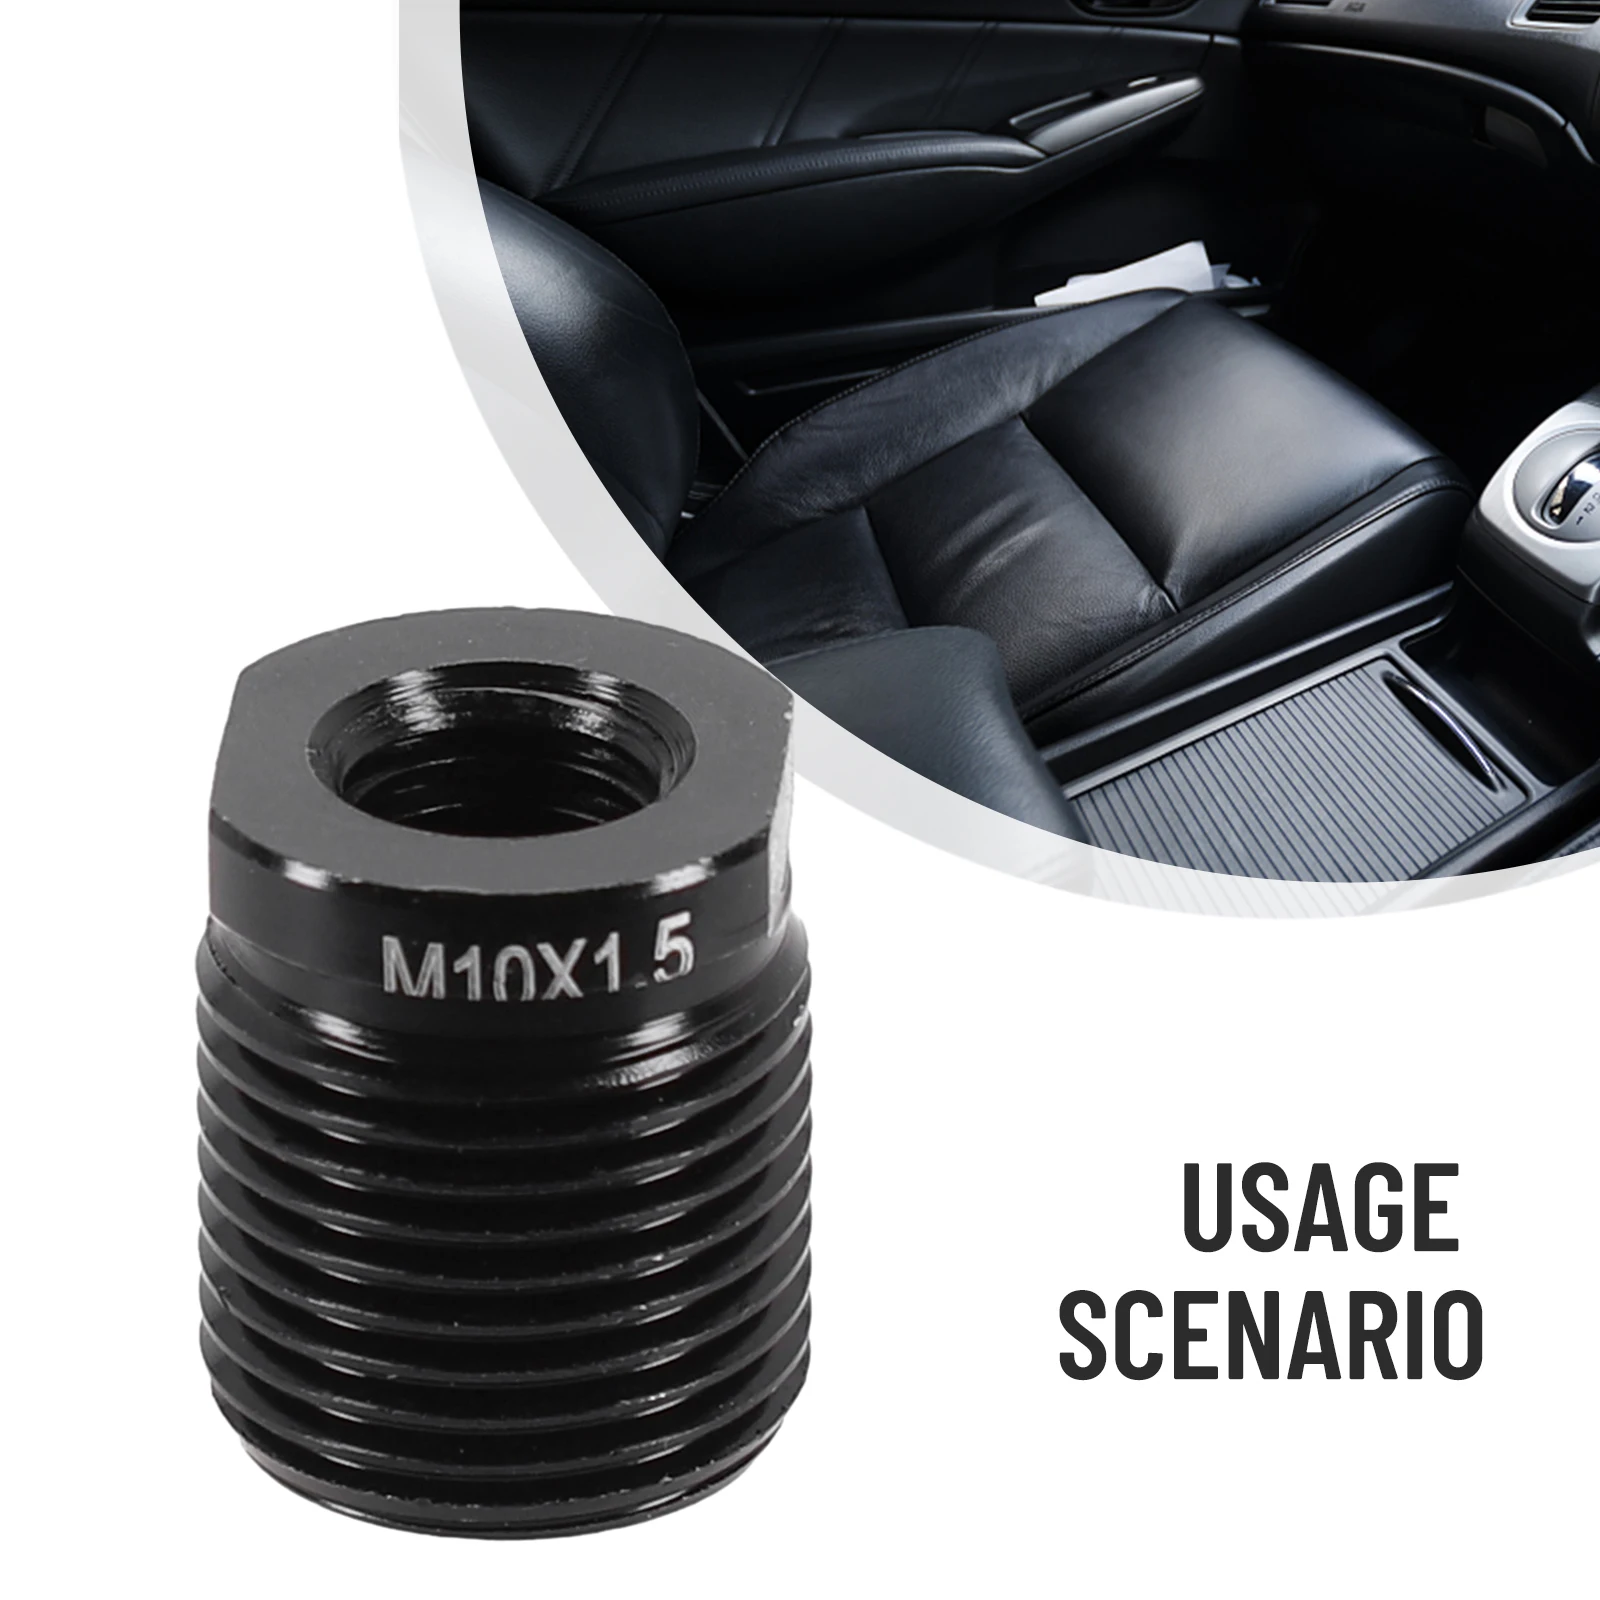 

Adapter Adapter Shift Knob Adapter Adapter With Inside Thread For Universal Knob Shift Knob Thread Adapter Nut High Quality